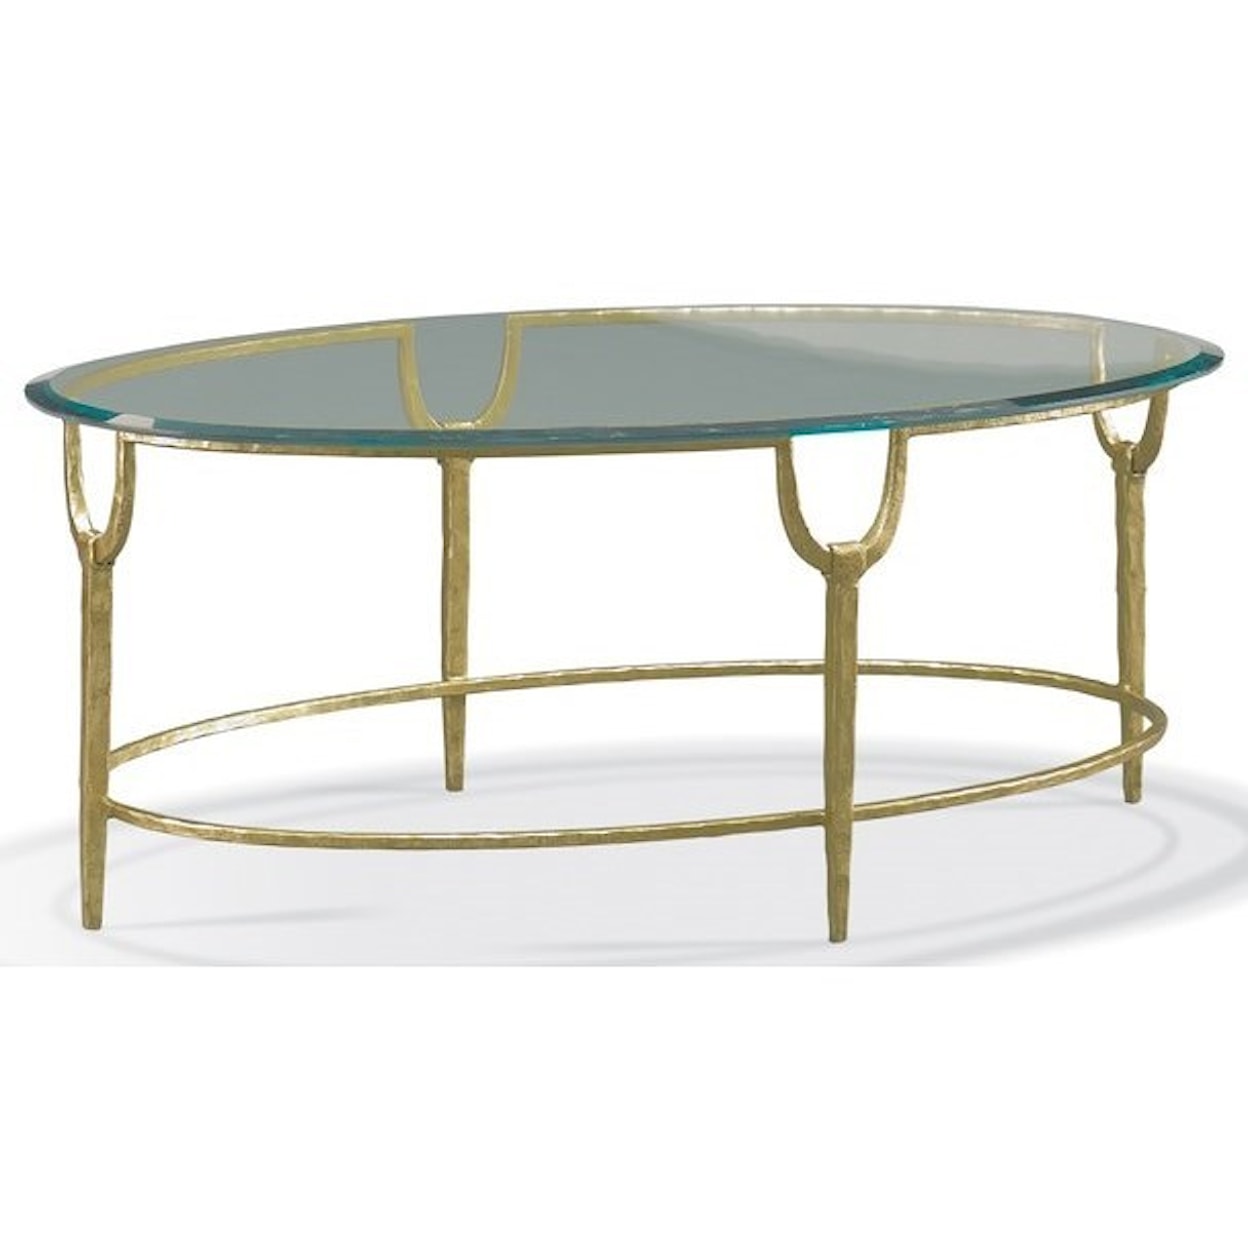 CTH Sherrill Occasional Masterpiece - Trifecta Oval Cocktail Table